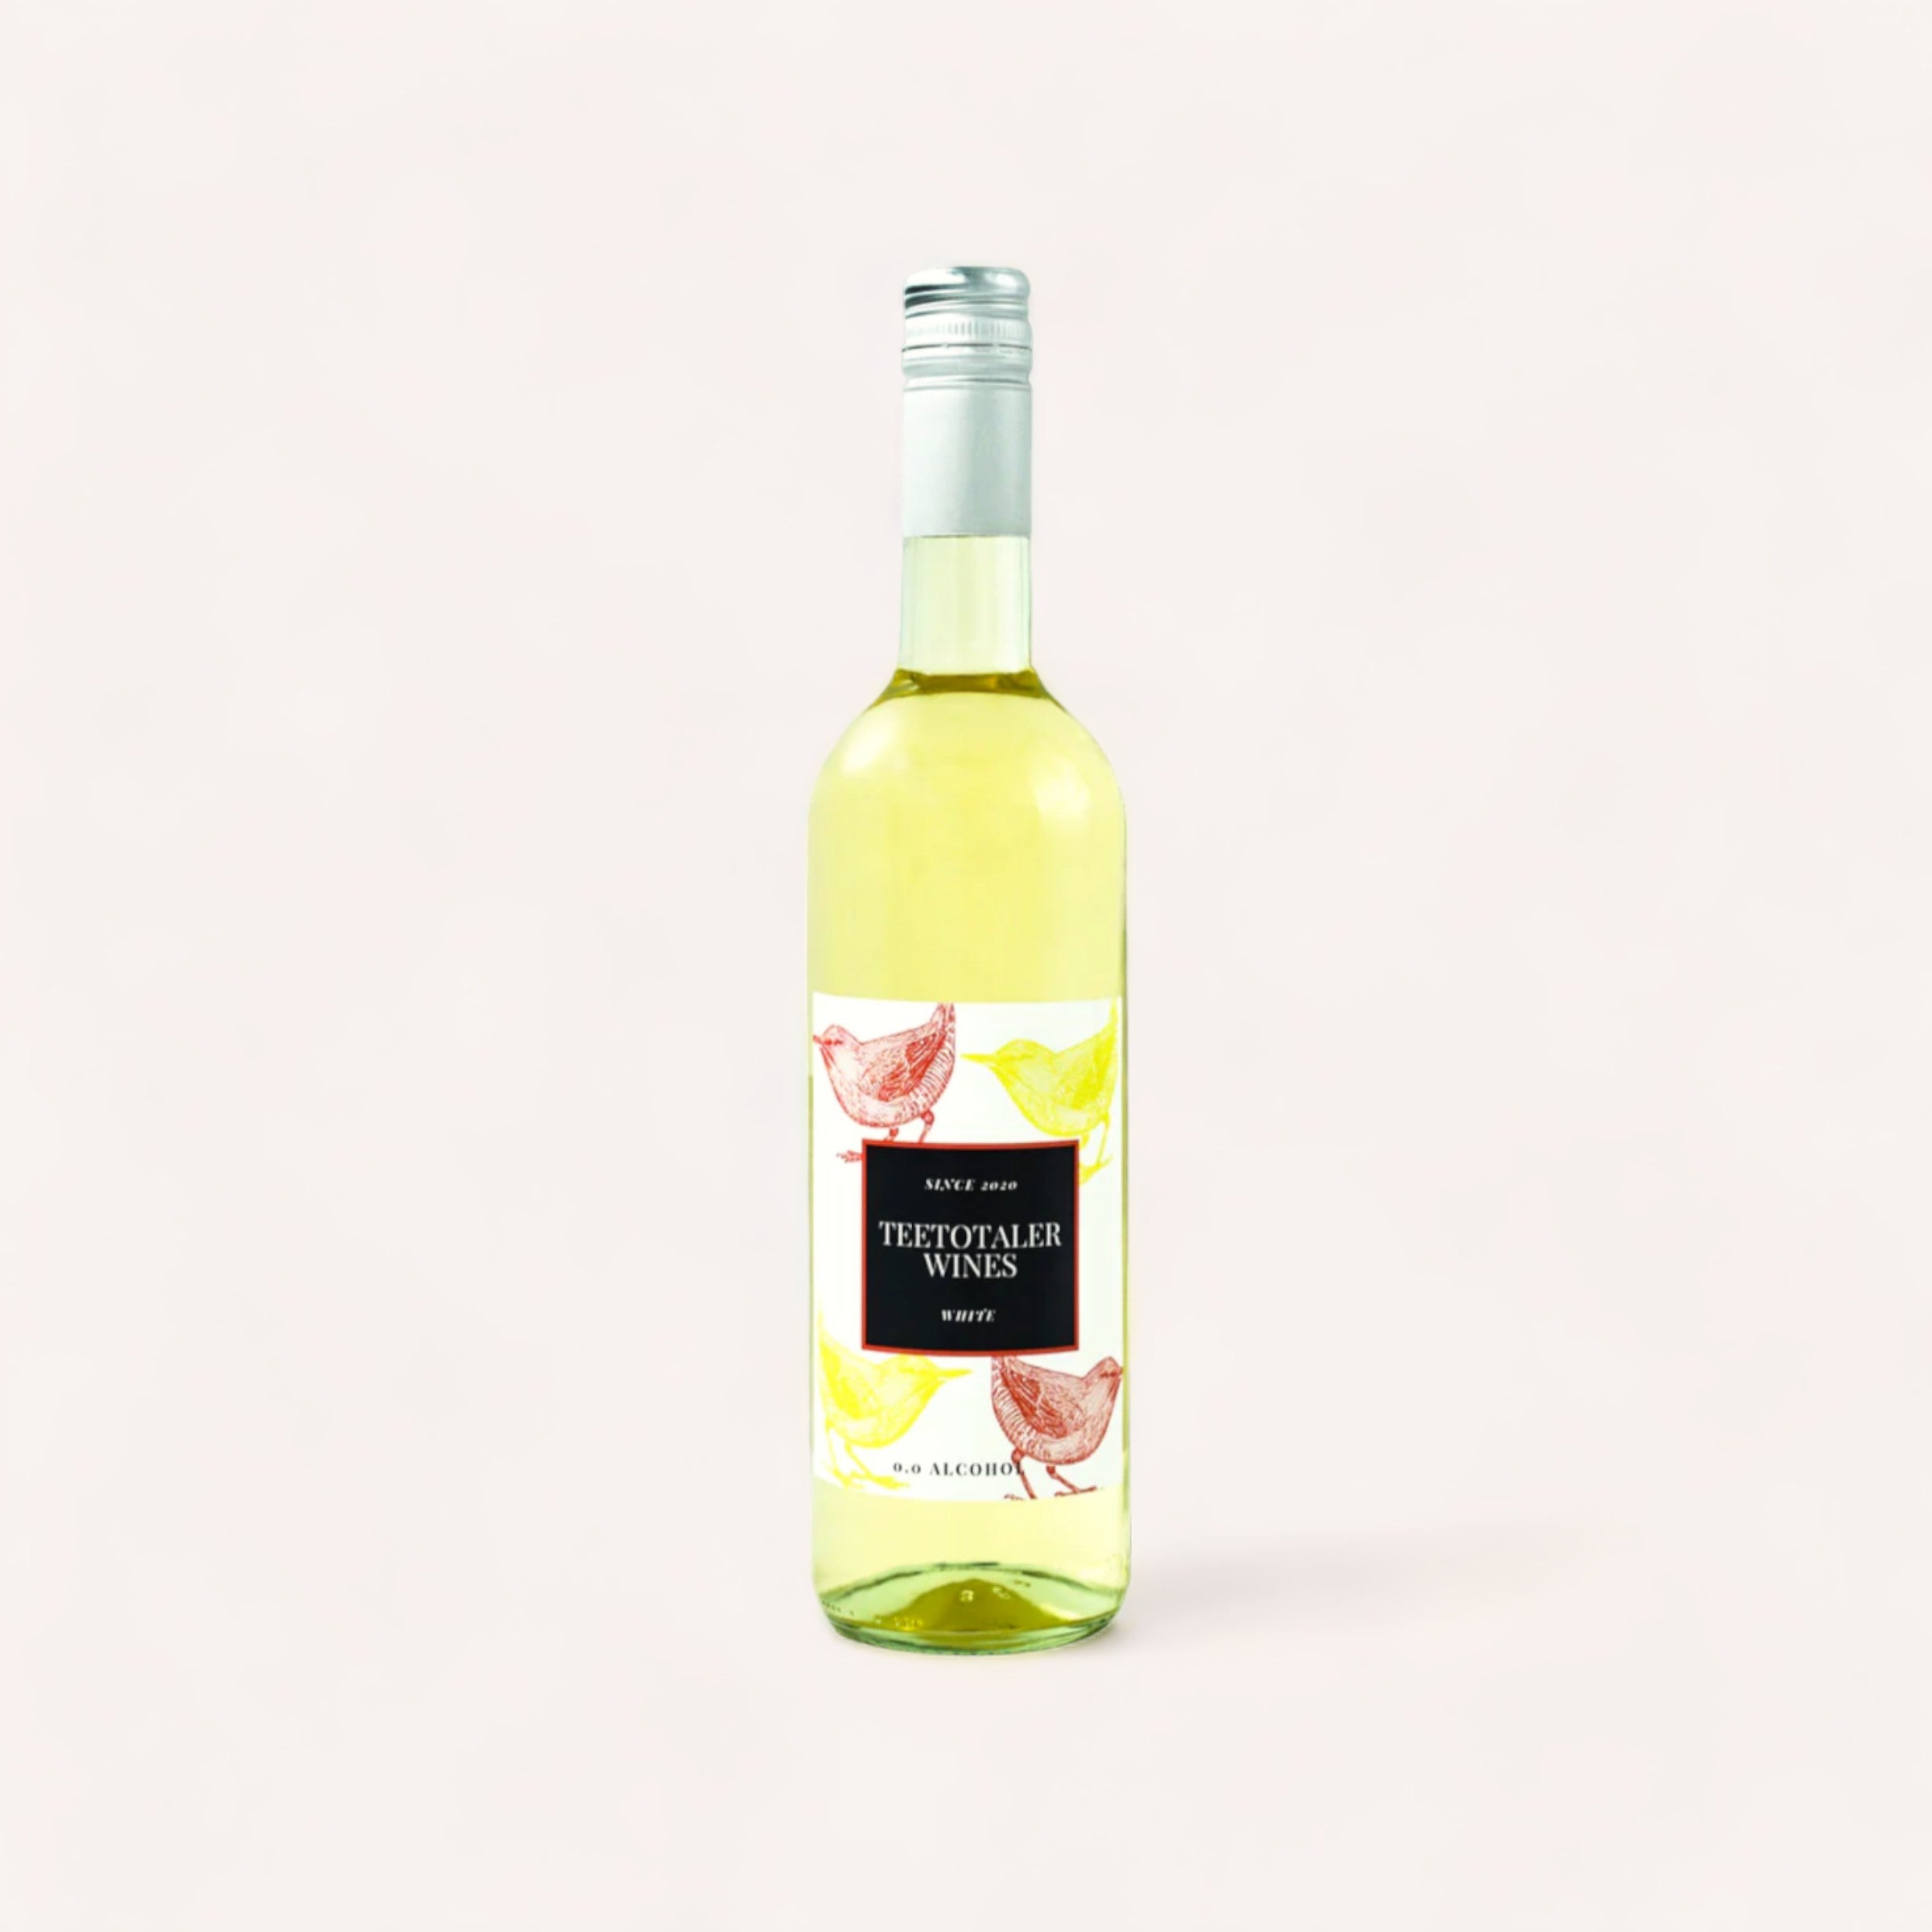 A bottle of Teetotaler Airen grape white wine with a label that features bird illustrations, centered on a clean, neutral background.